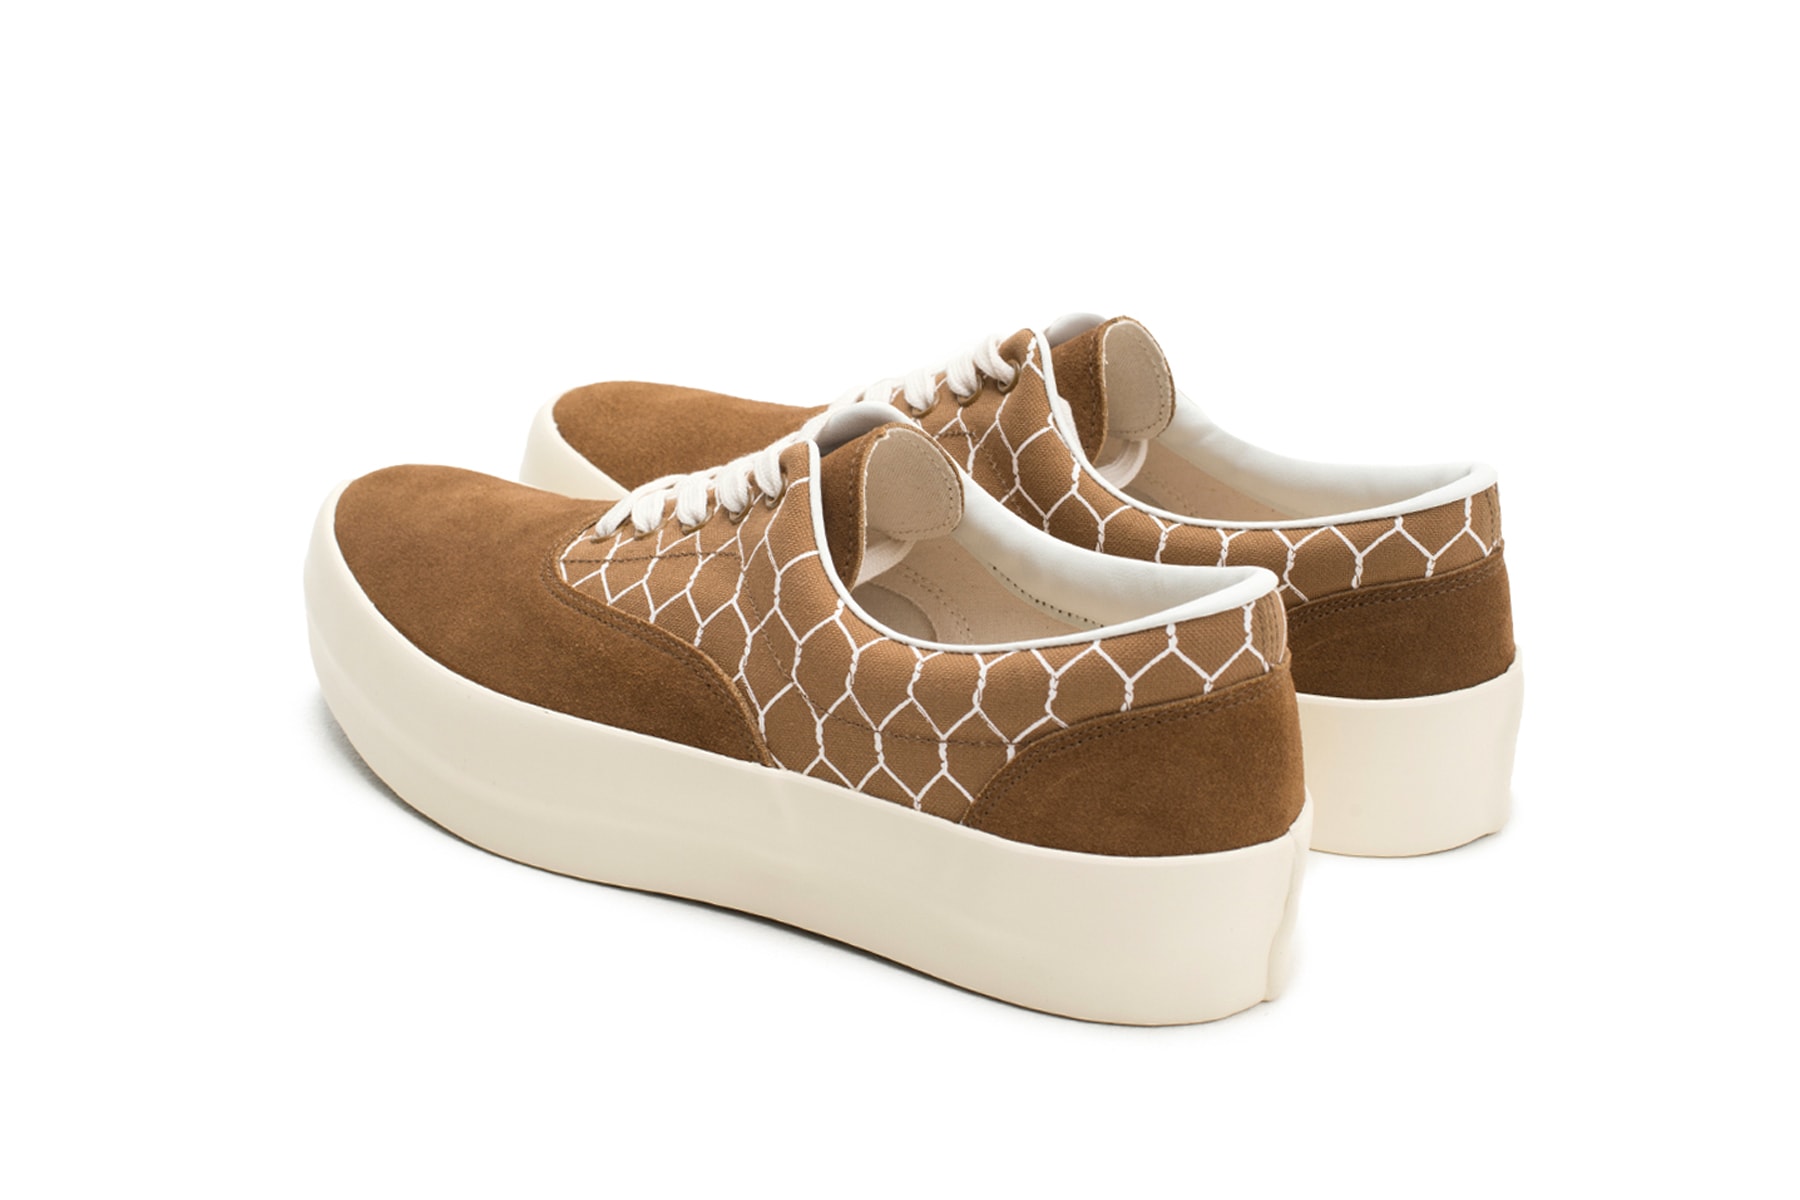 UNDERCOVER Wire Fence Print Tennis Shoe Brown